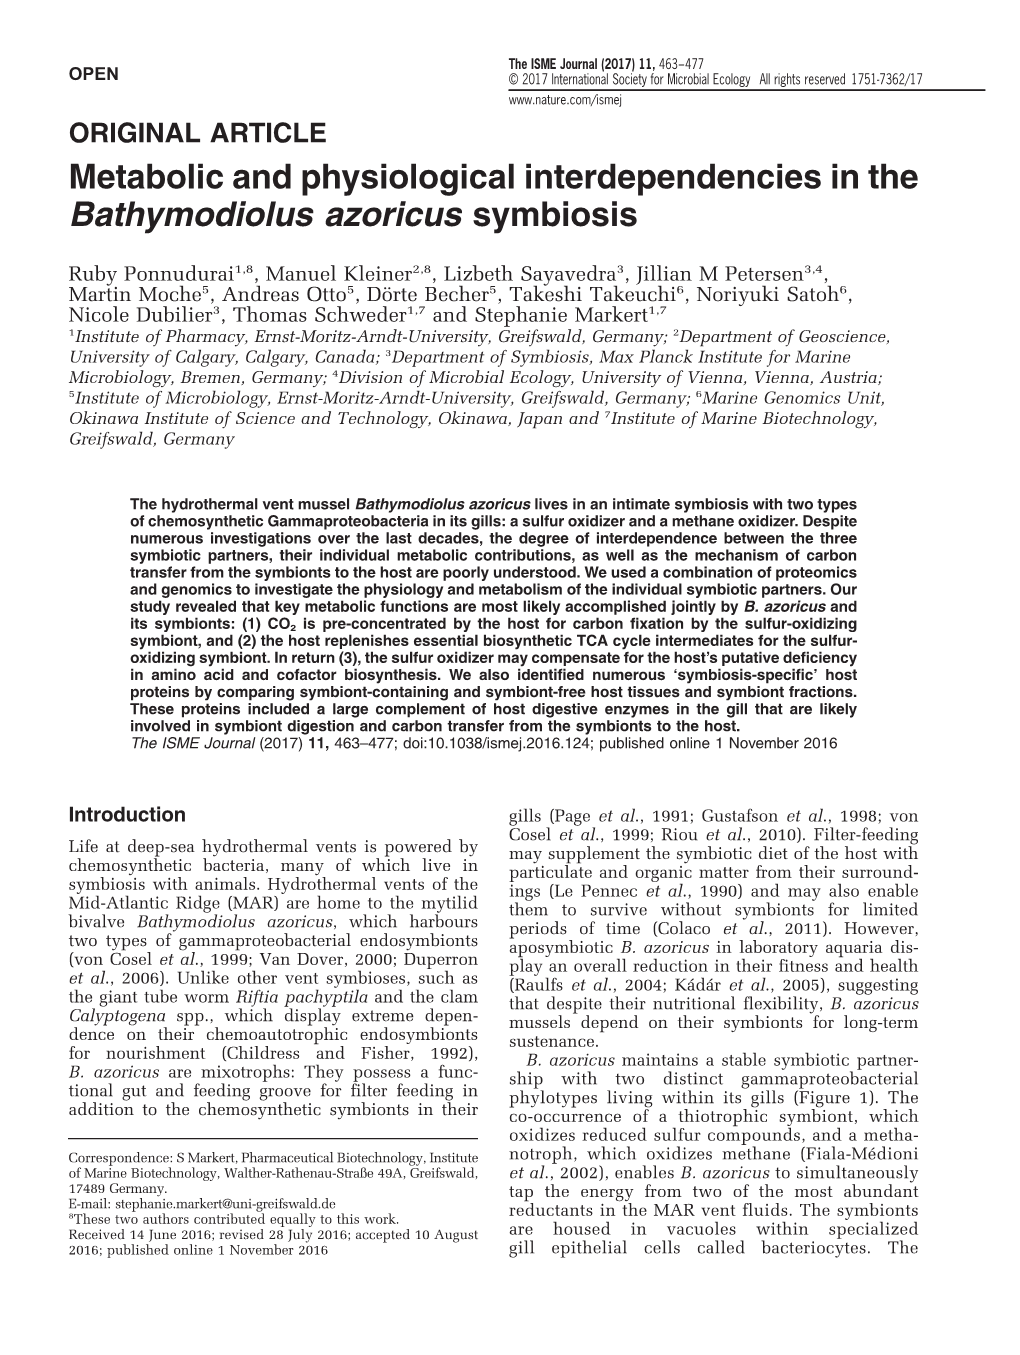 Metabolic and Physiological Interdependencies in the Bathymodiolus Azoricus Symbiosis